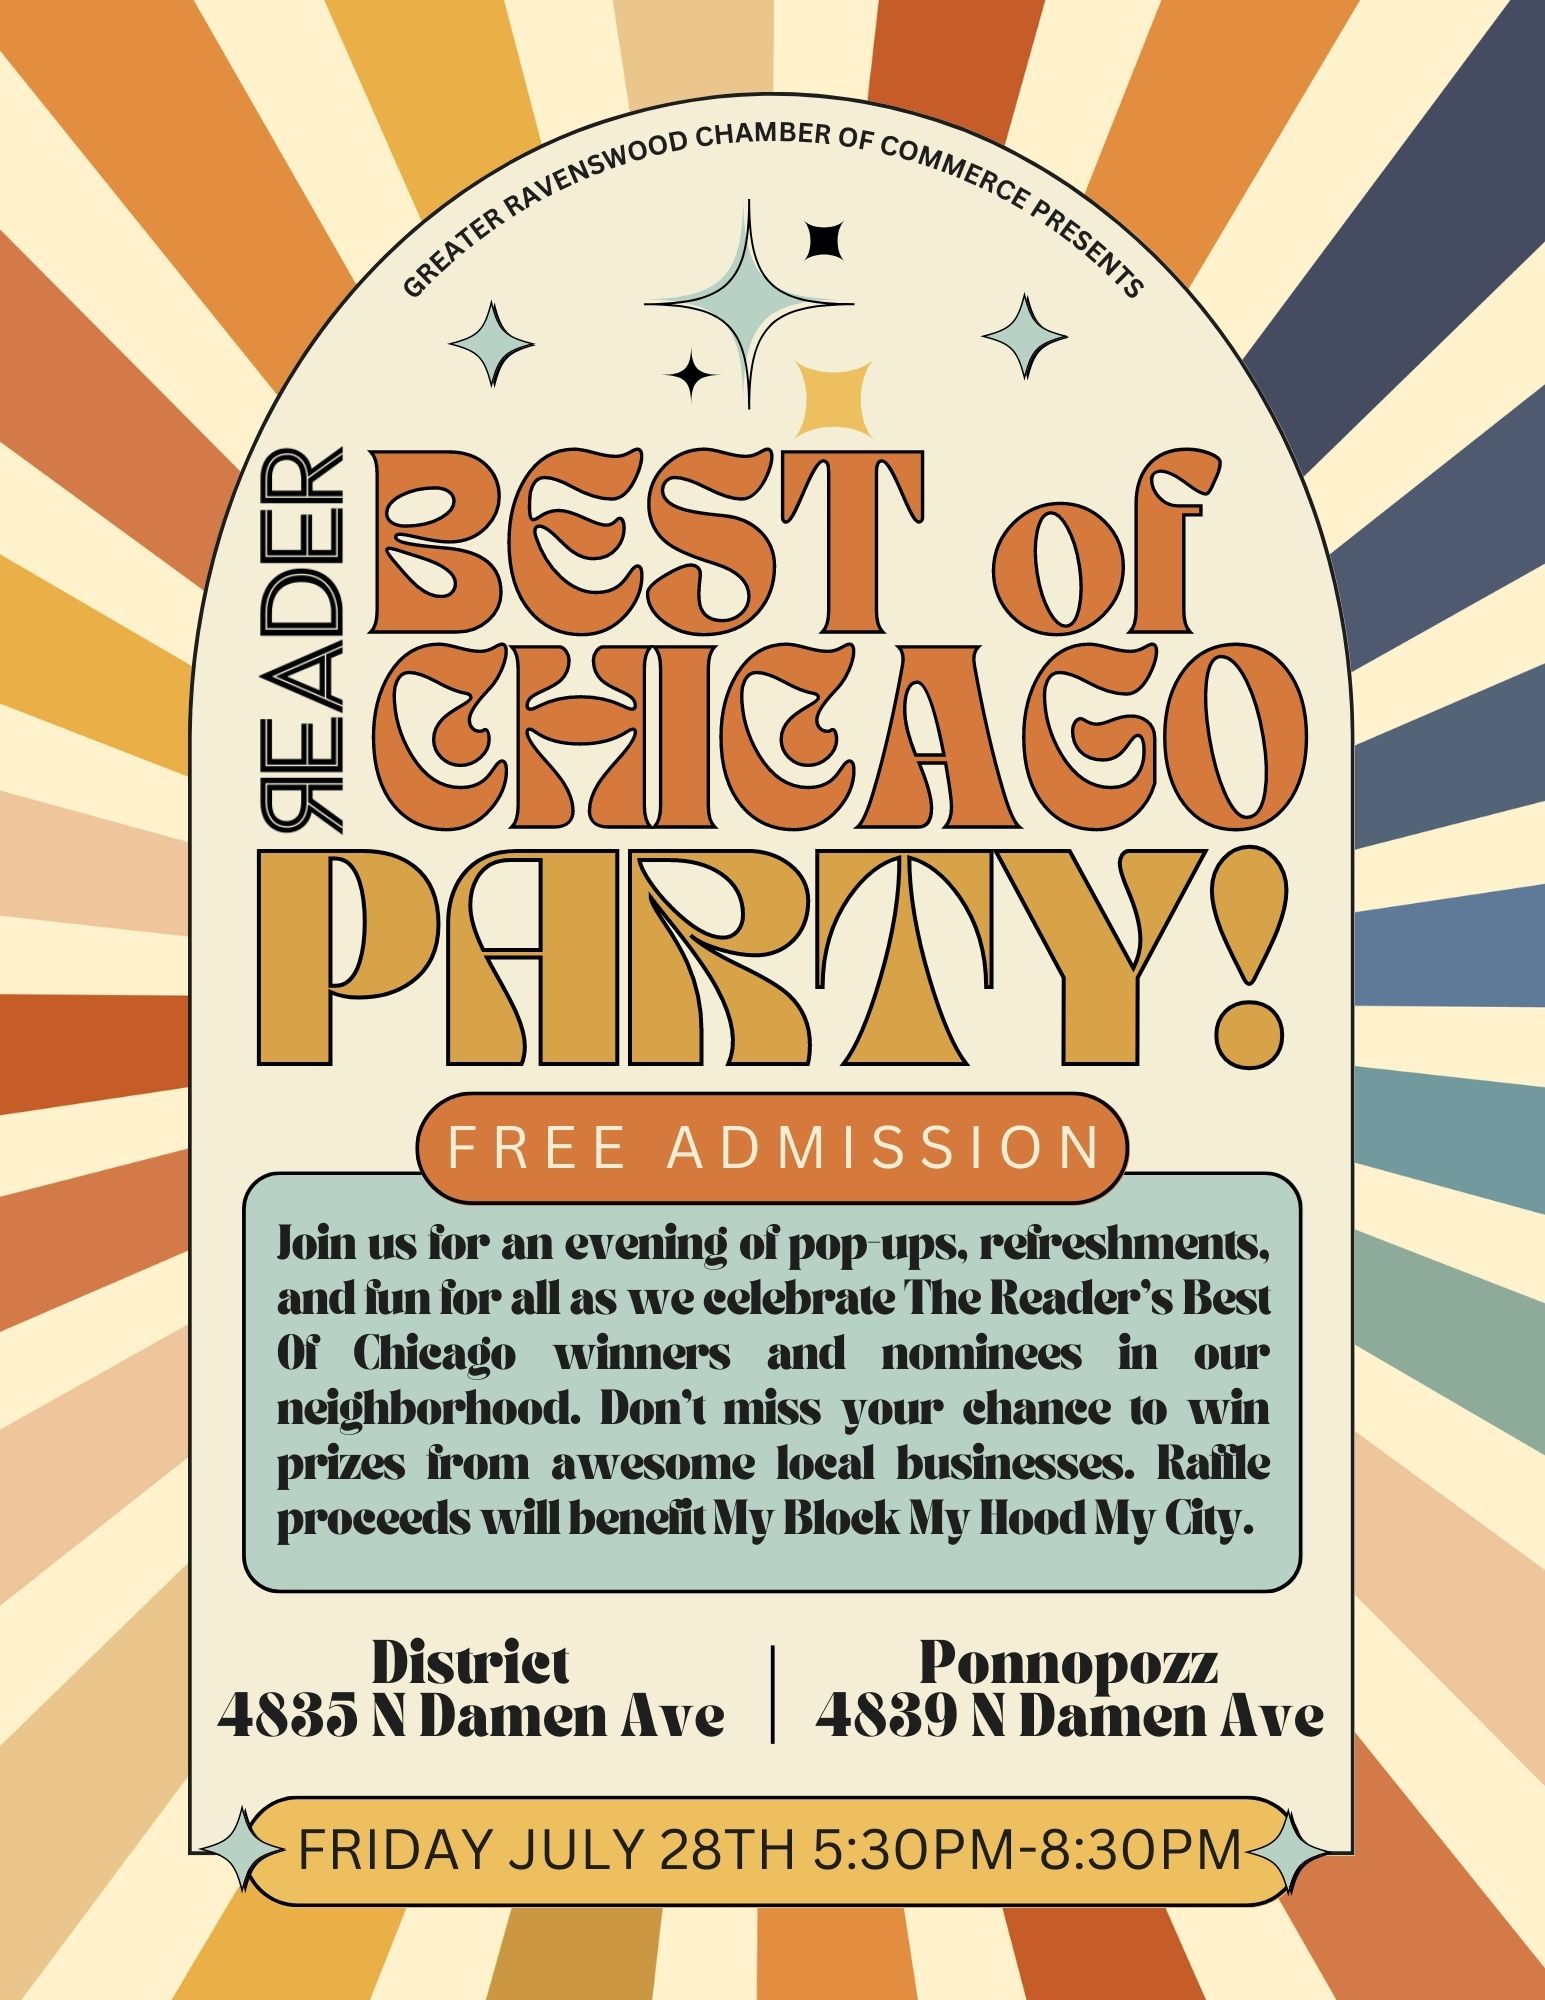 Ravenswood Businesses Host “Best of Chicago” Party on July 28